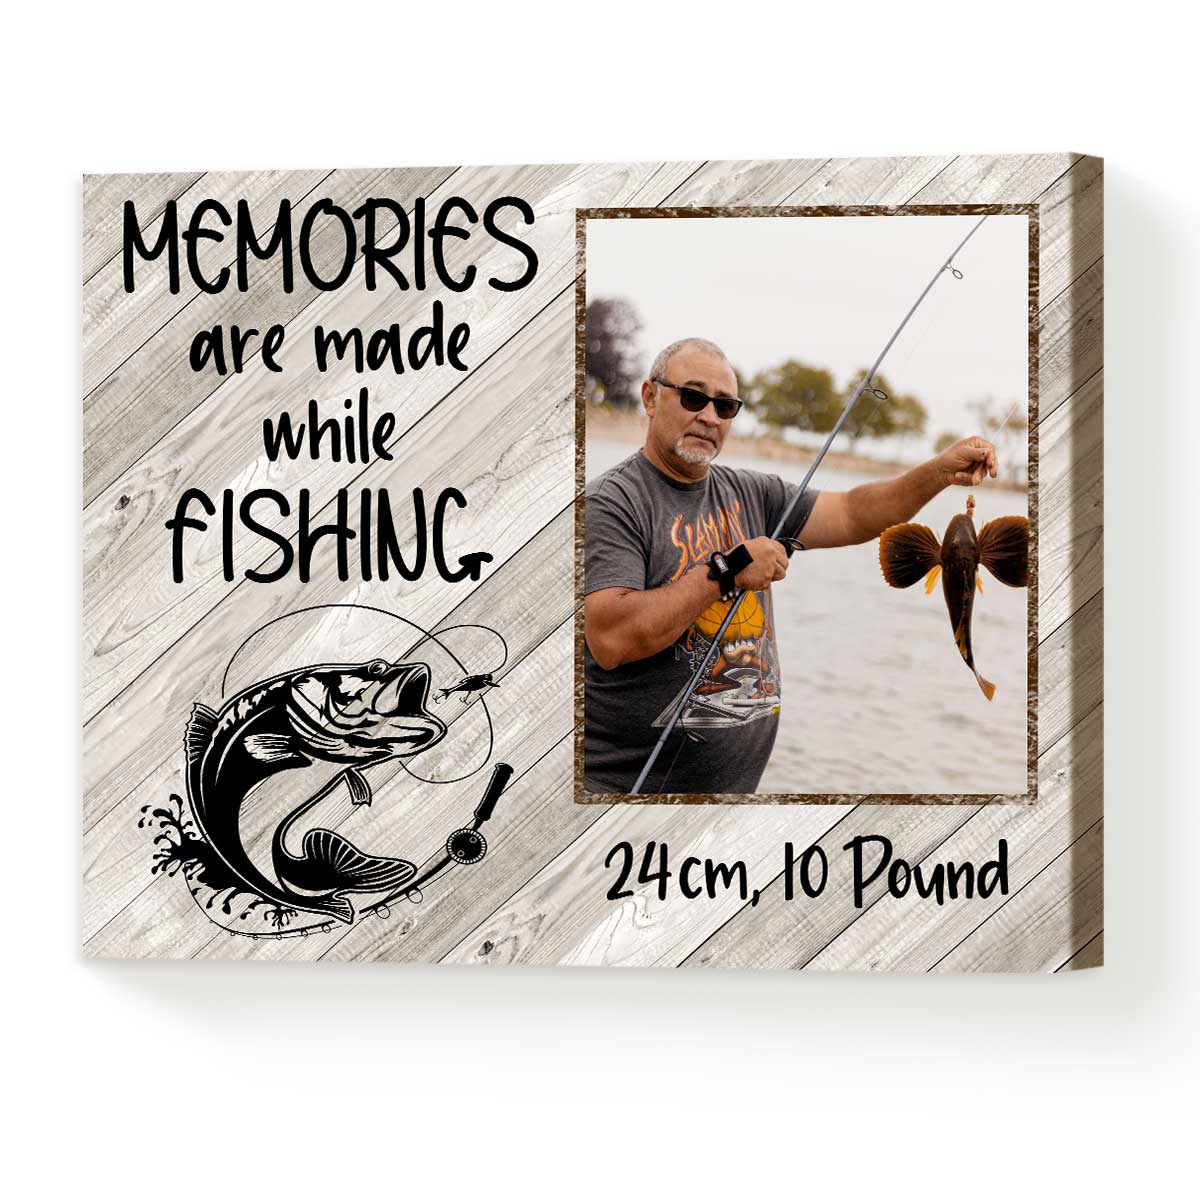 Custom Best Gifts For Fisherman, Fishing Gifts For Dad, Man Cave Wall  Decor, Fishing Gift Ideas